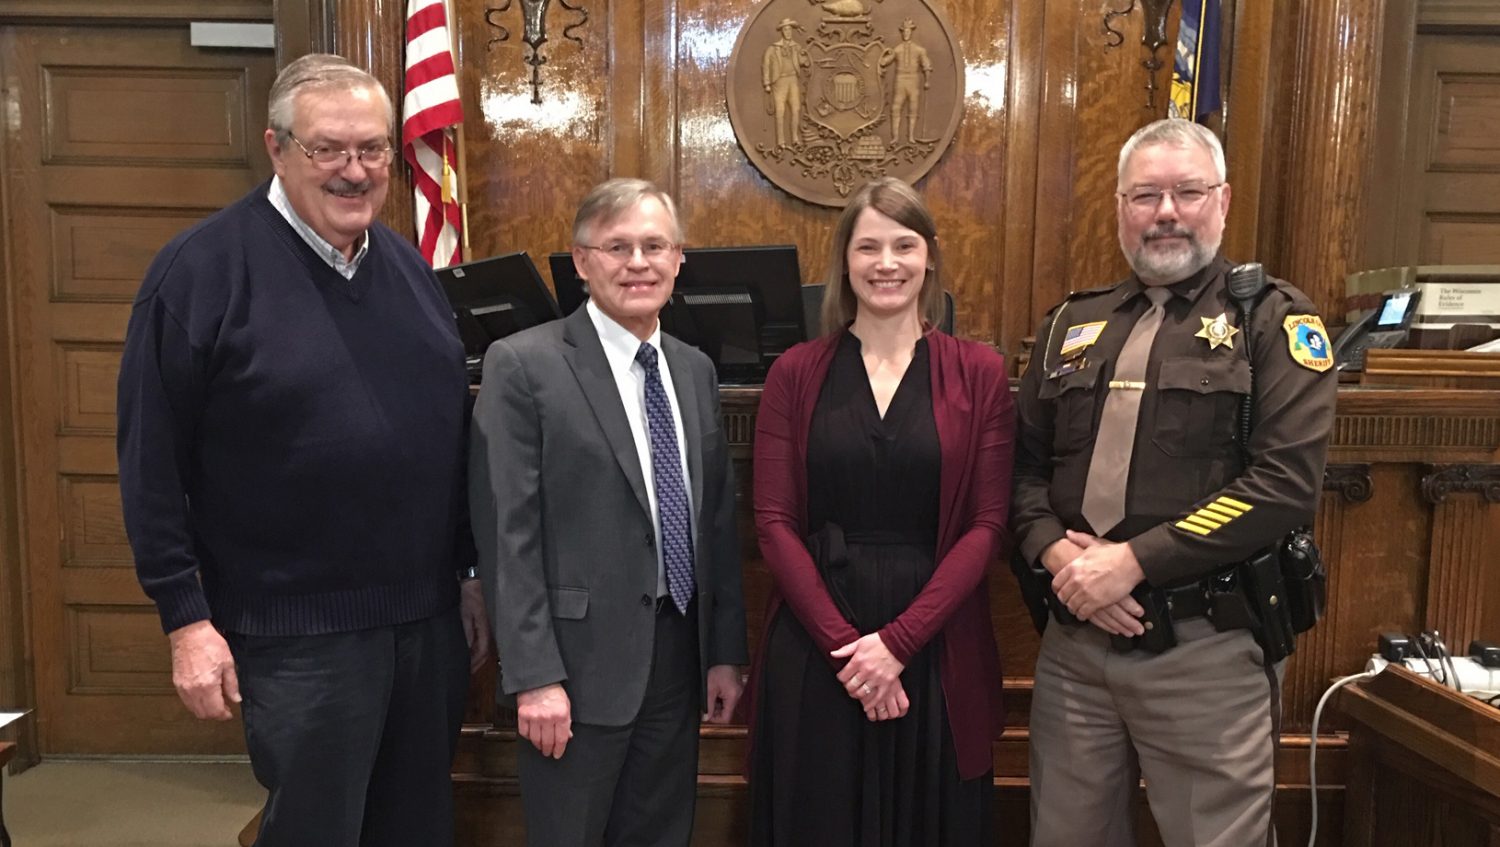 Newly-elected county officials take oath of office